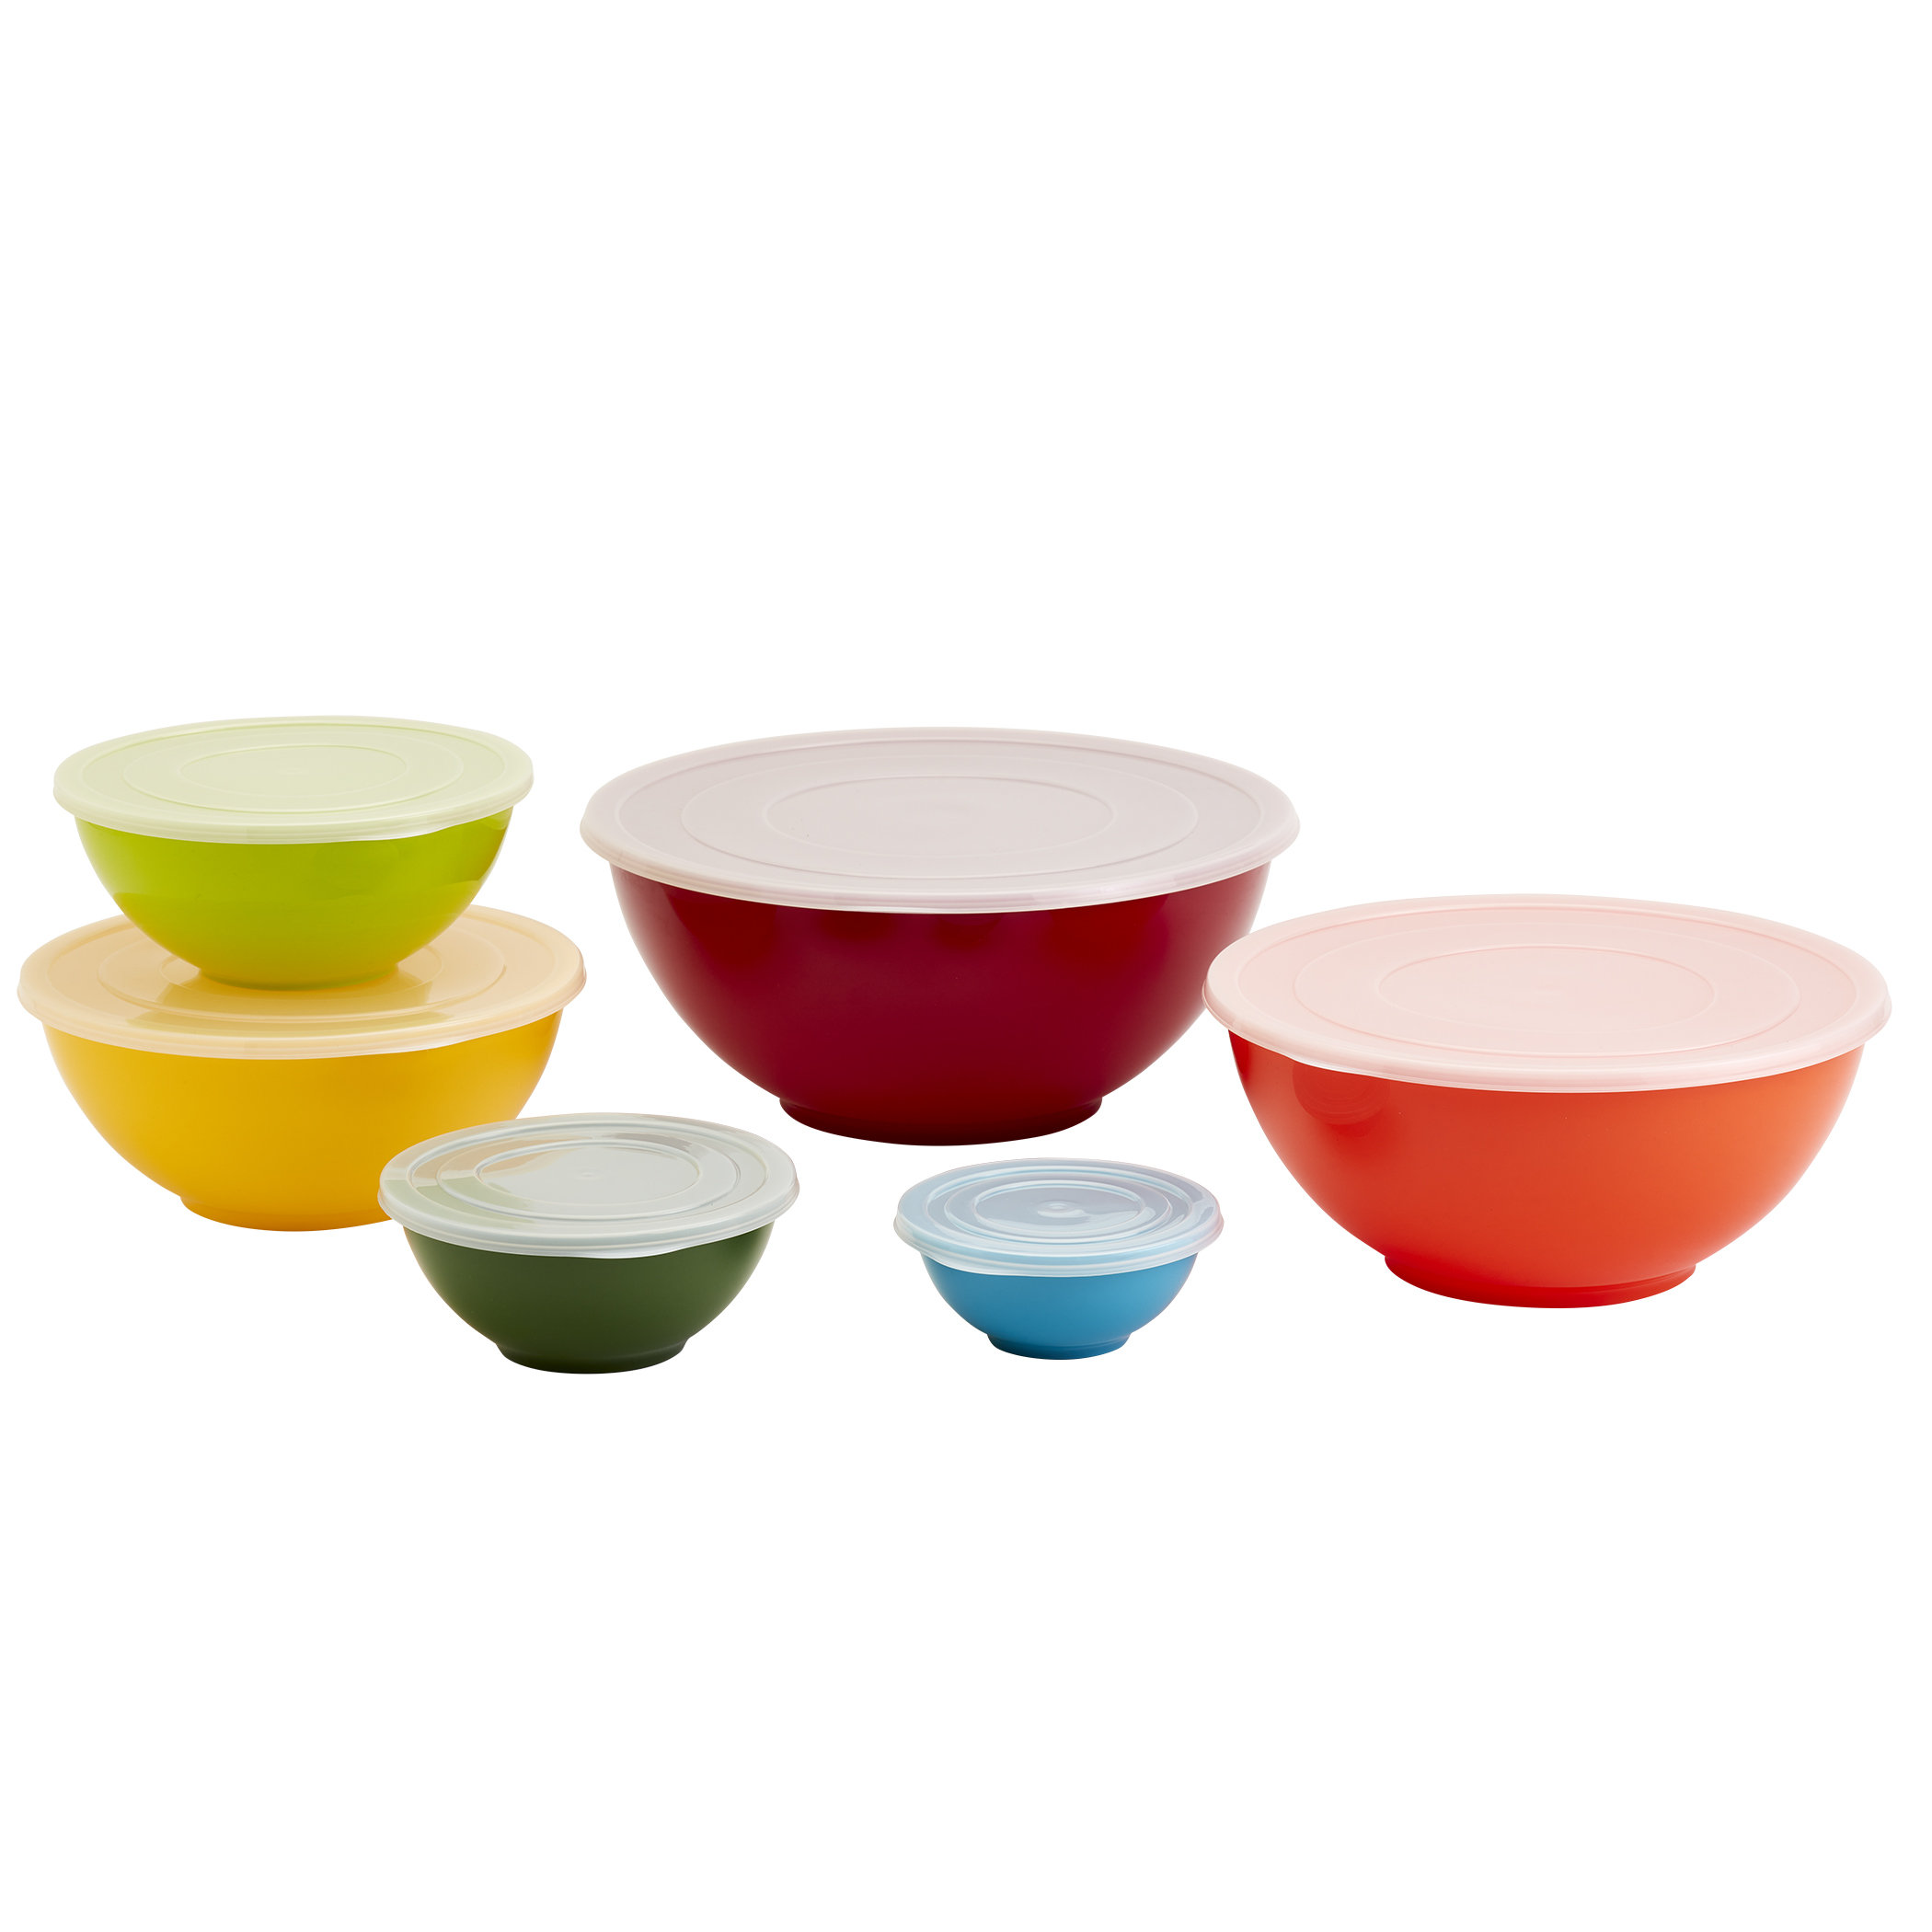  Farberware Classic Plastic Mixing Bowls, Red Set of 3, Small:  Home & Kitchen